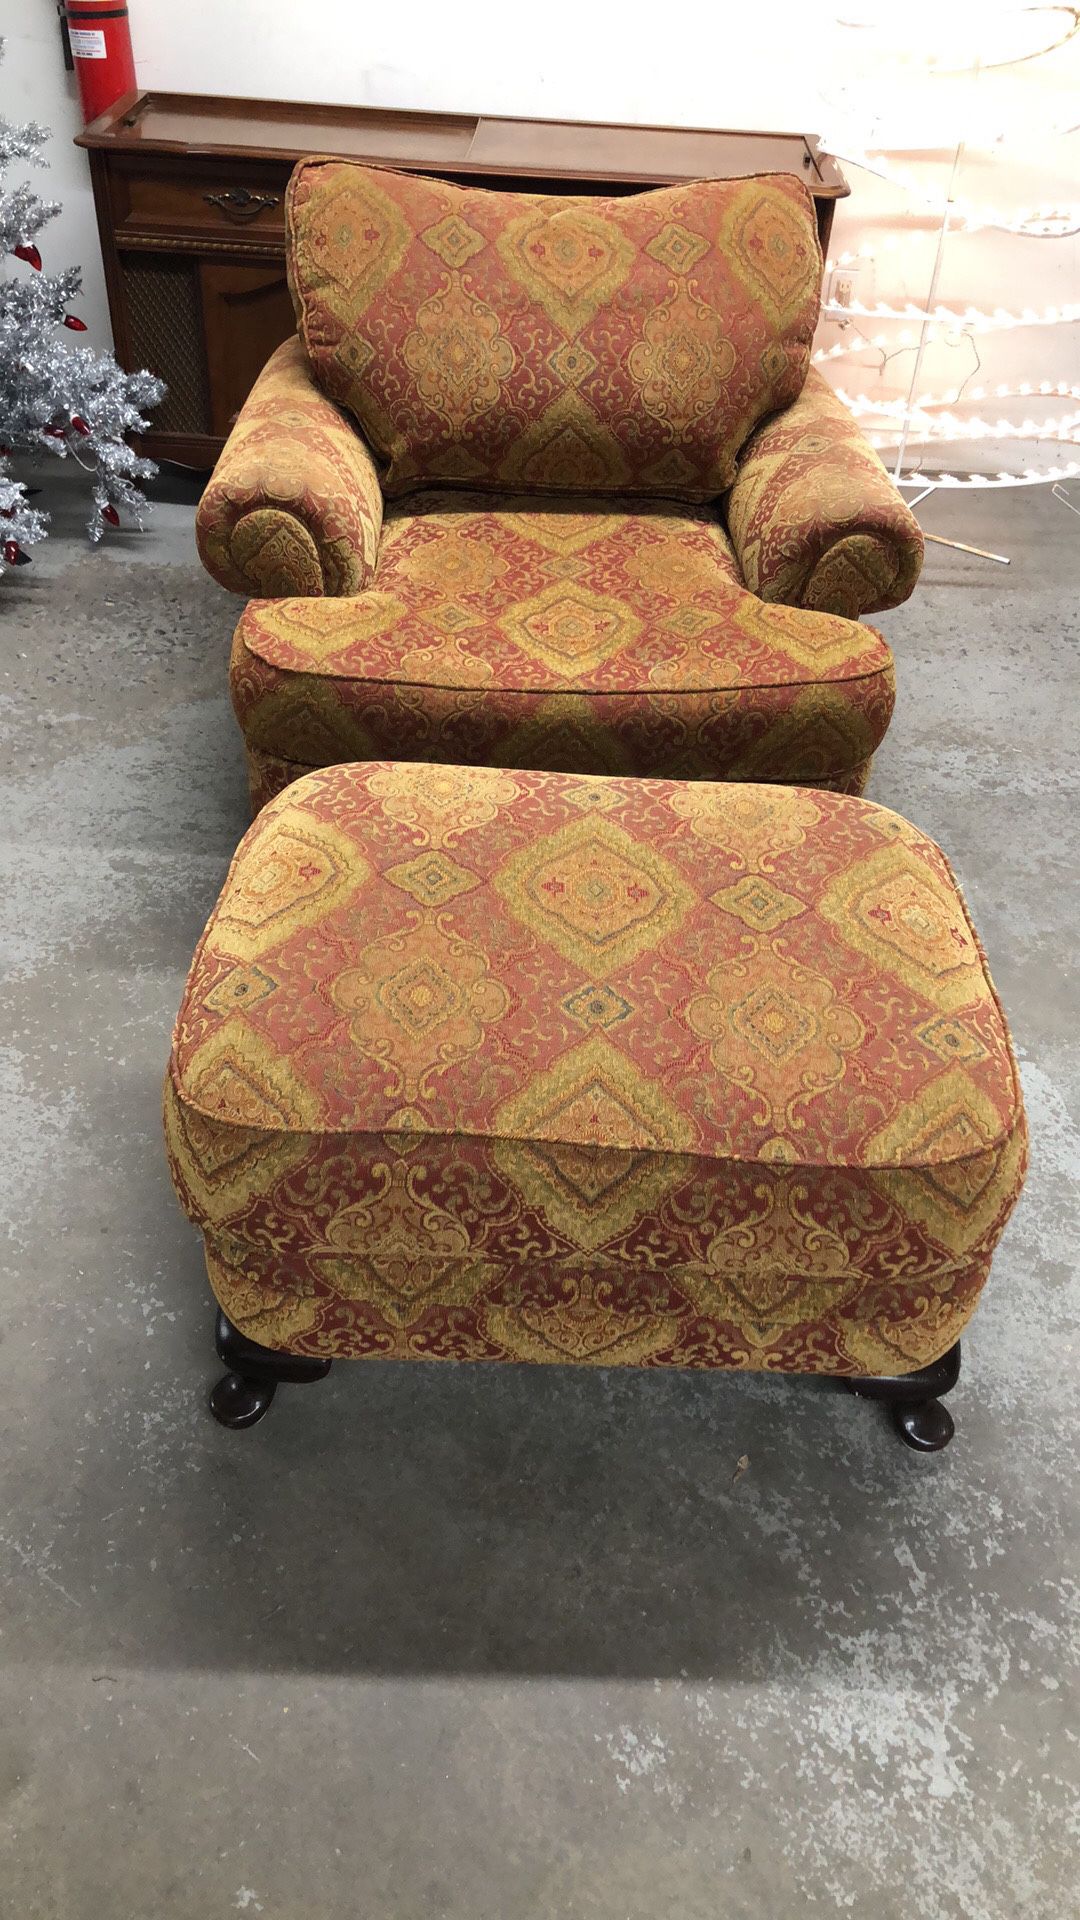  Strong chair with Ottoman  Good Condition